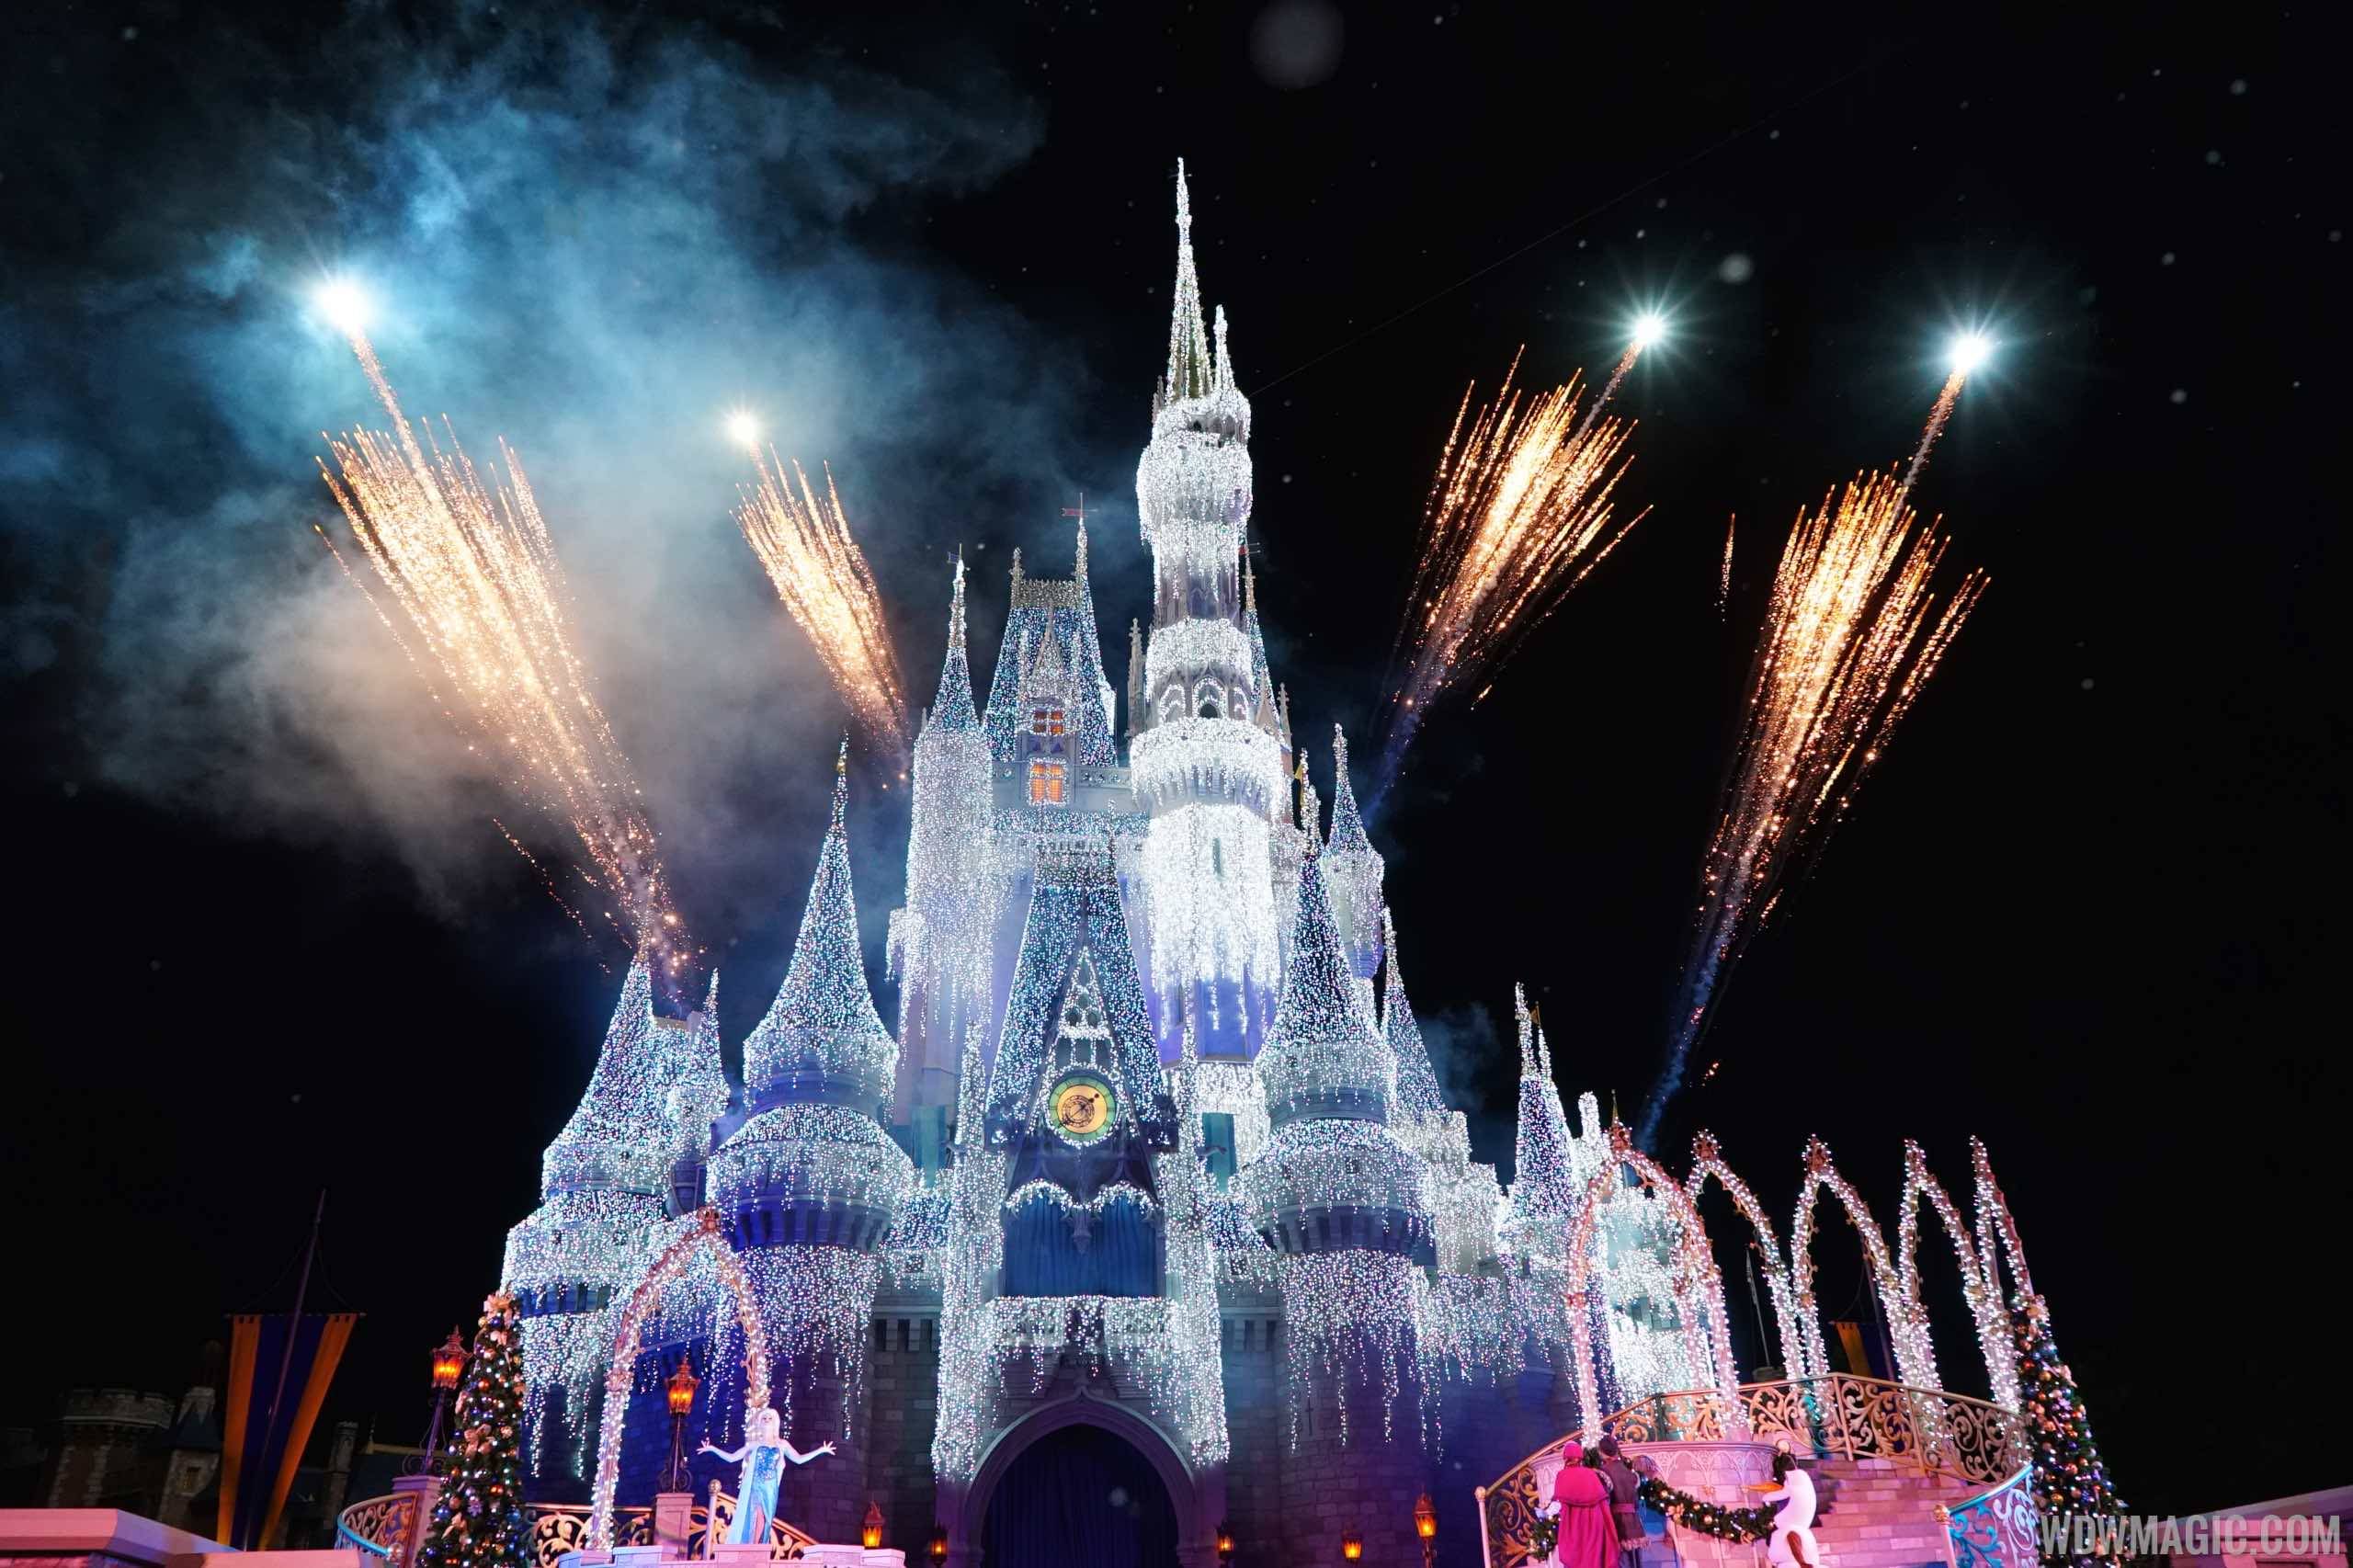 PHOTOS - 'A Frozen Holiday Wish' castle lighting show at the Magic Kingdom